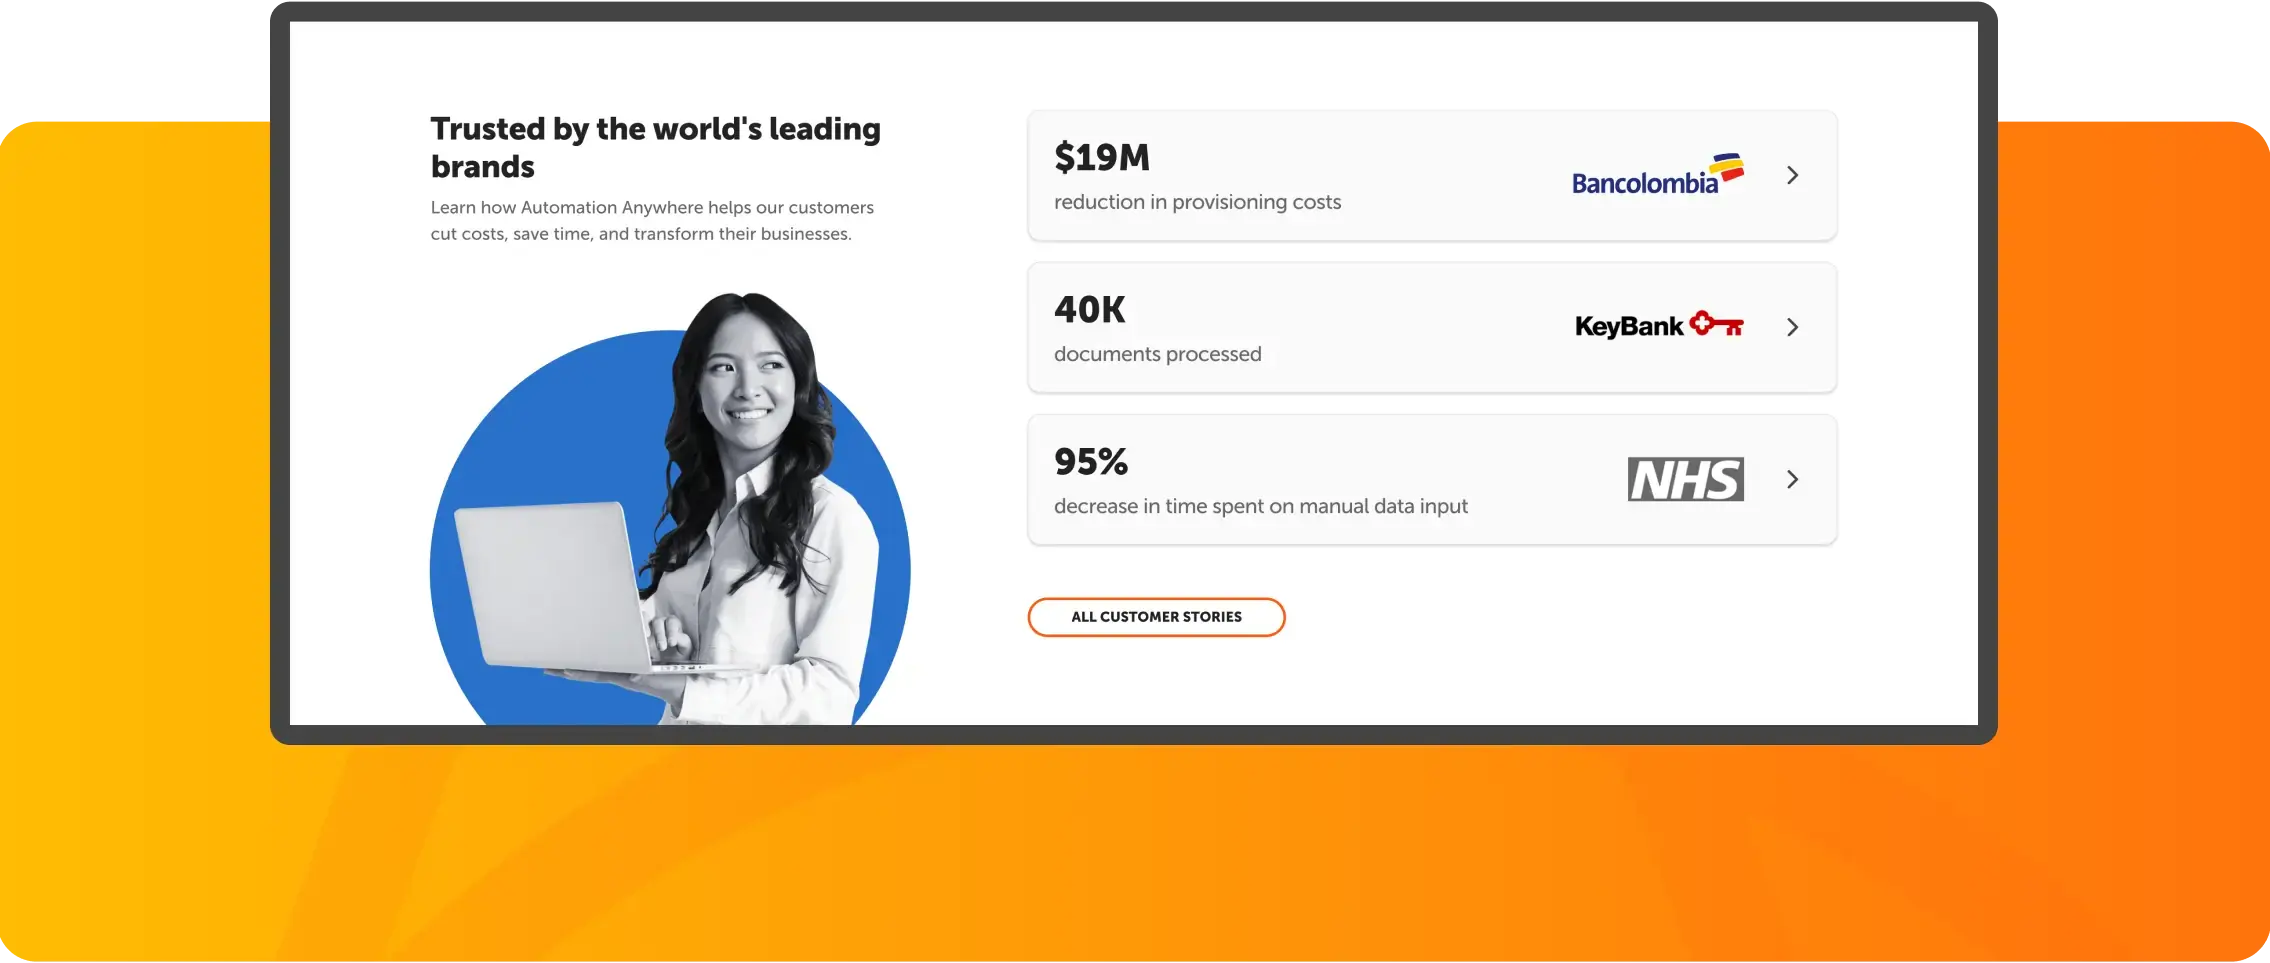 Section of the Automation Anywhere website advertising key client stats — $19m reduction in provisioning costs (Bancolumbia), 40k documents processed (KeyBank), 95% less time spent on manual data input (NHS)